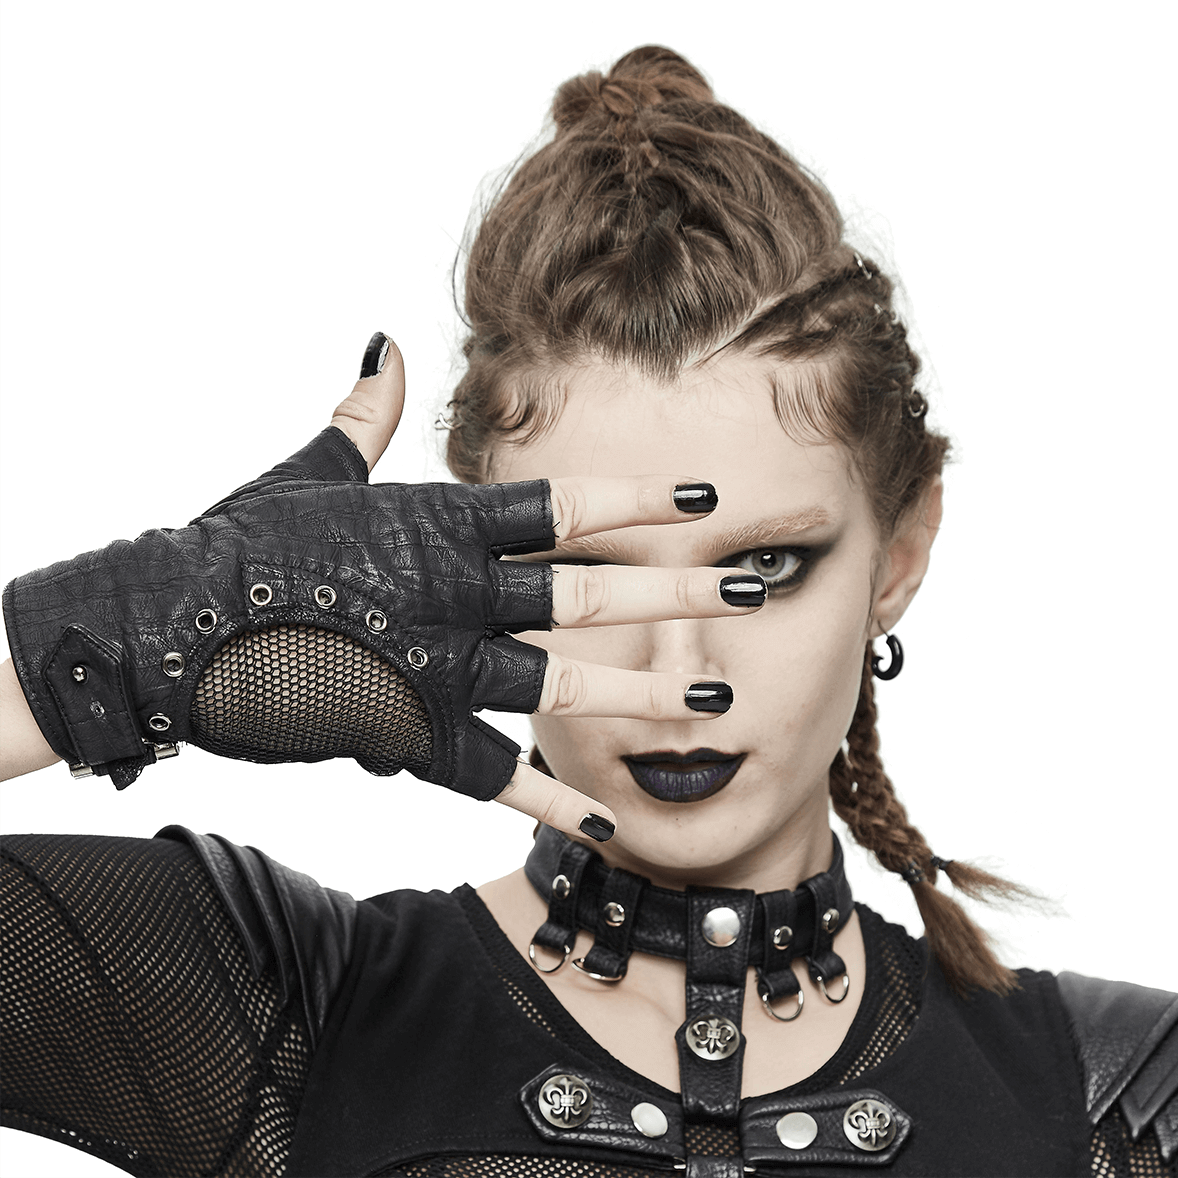 Punk Adjustable Straps Fingerless Gloves / Black PU Leather Mesh Gloves in Gothic Style - HARD'N'HEAVY